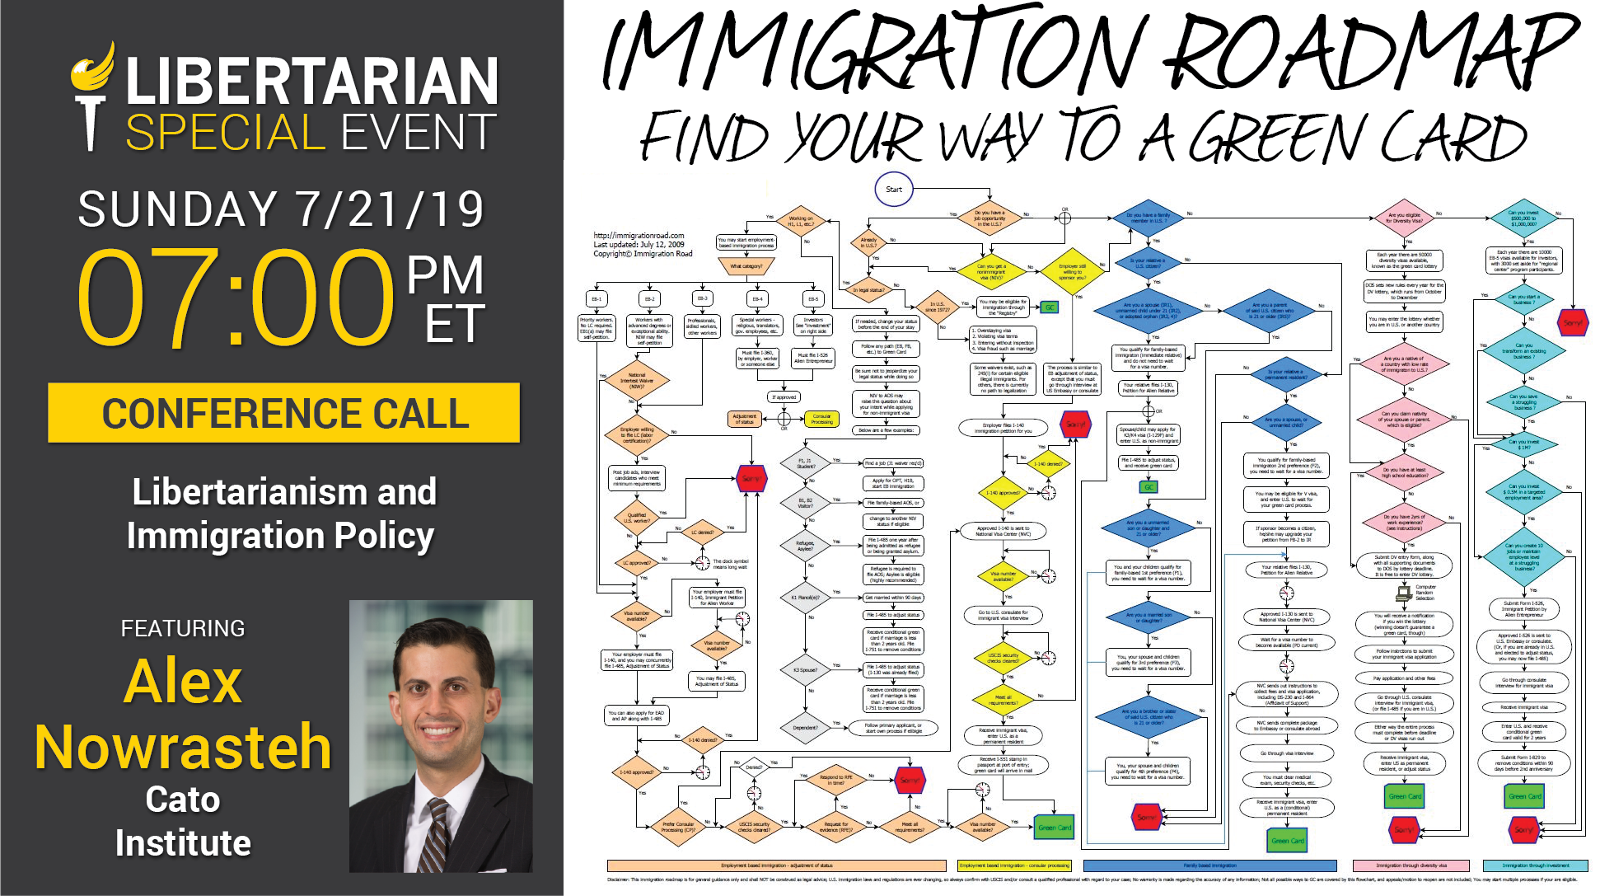 Libertarianism and Immigration conference call featuring Alex Nowrasteh